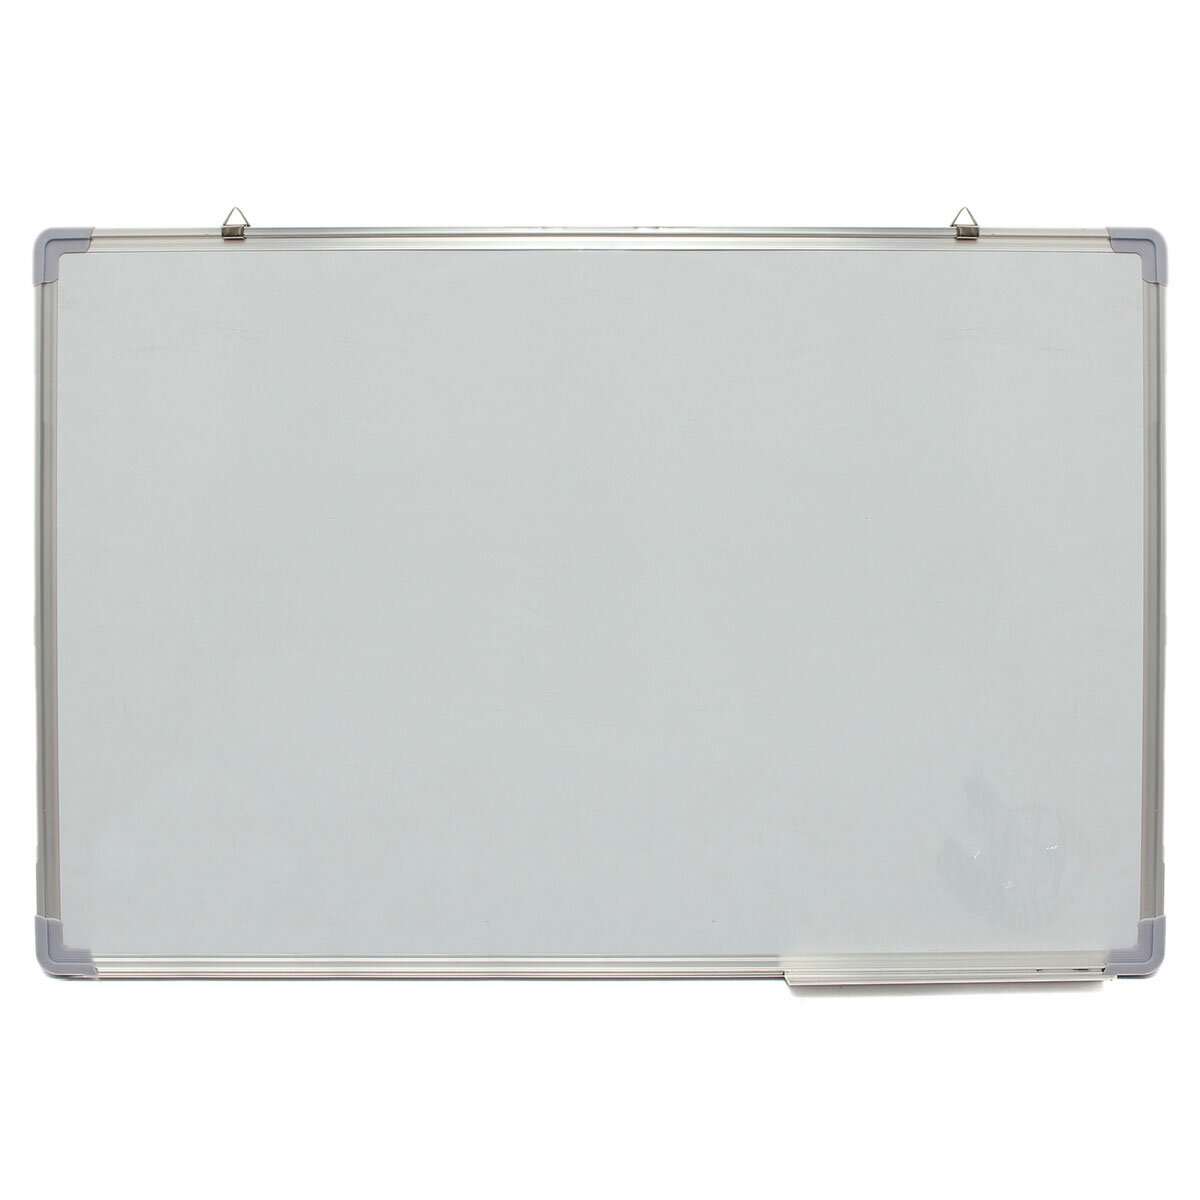 Image of Magnetic Dry Wipe Whiteboard Portable Office School Notice Drawing Board